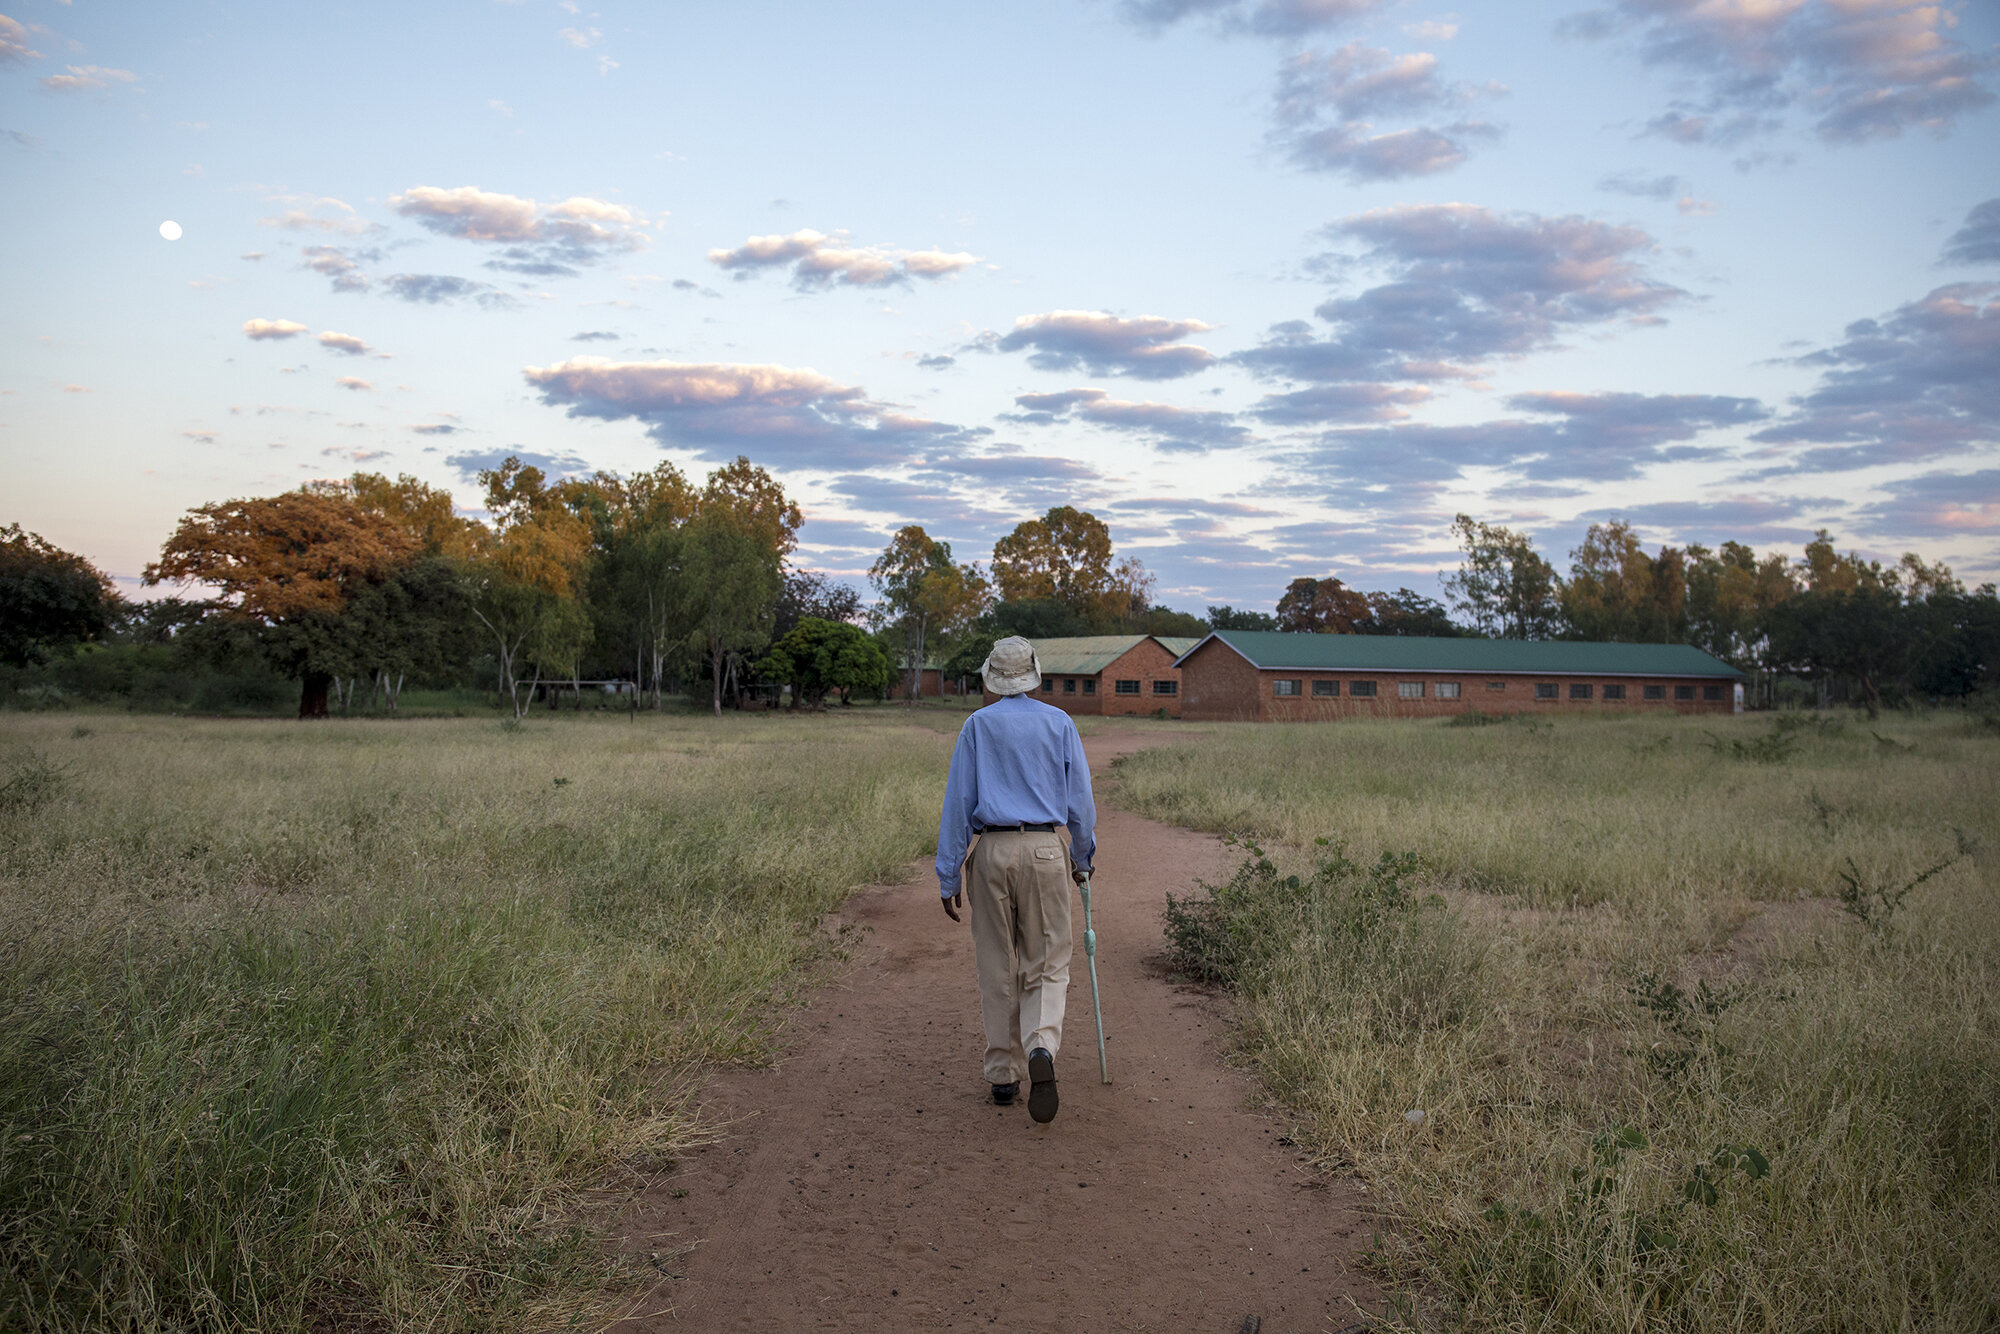  Every morning William Phiri walks to a nearby catholic church in his community to attend mass. He believes God protects us all in our daily lives.  